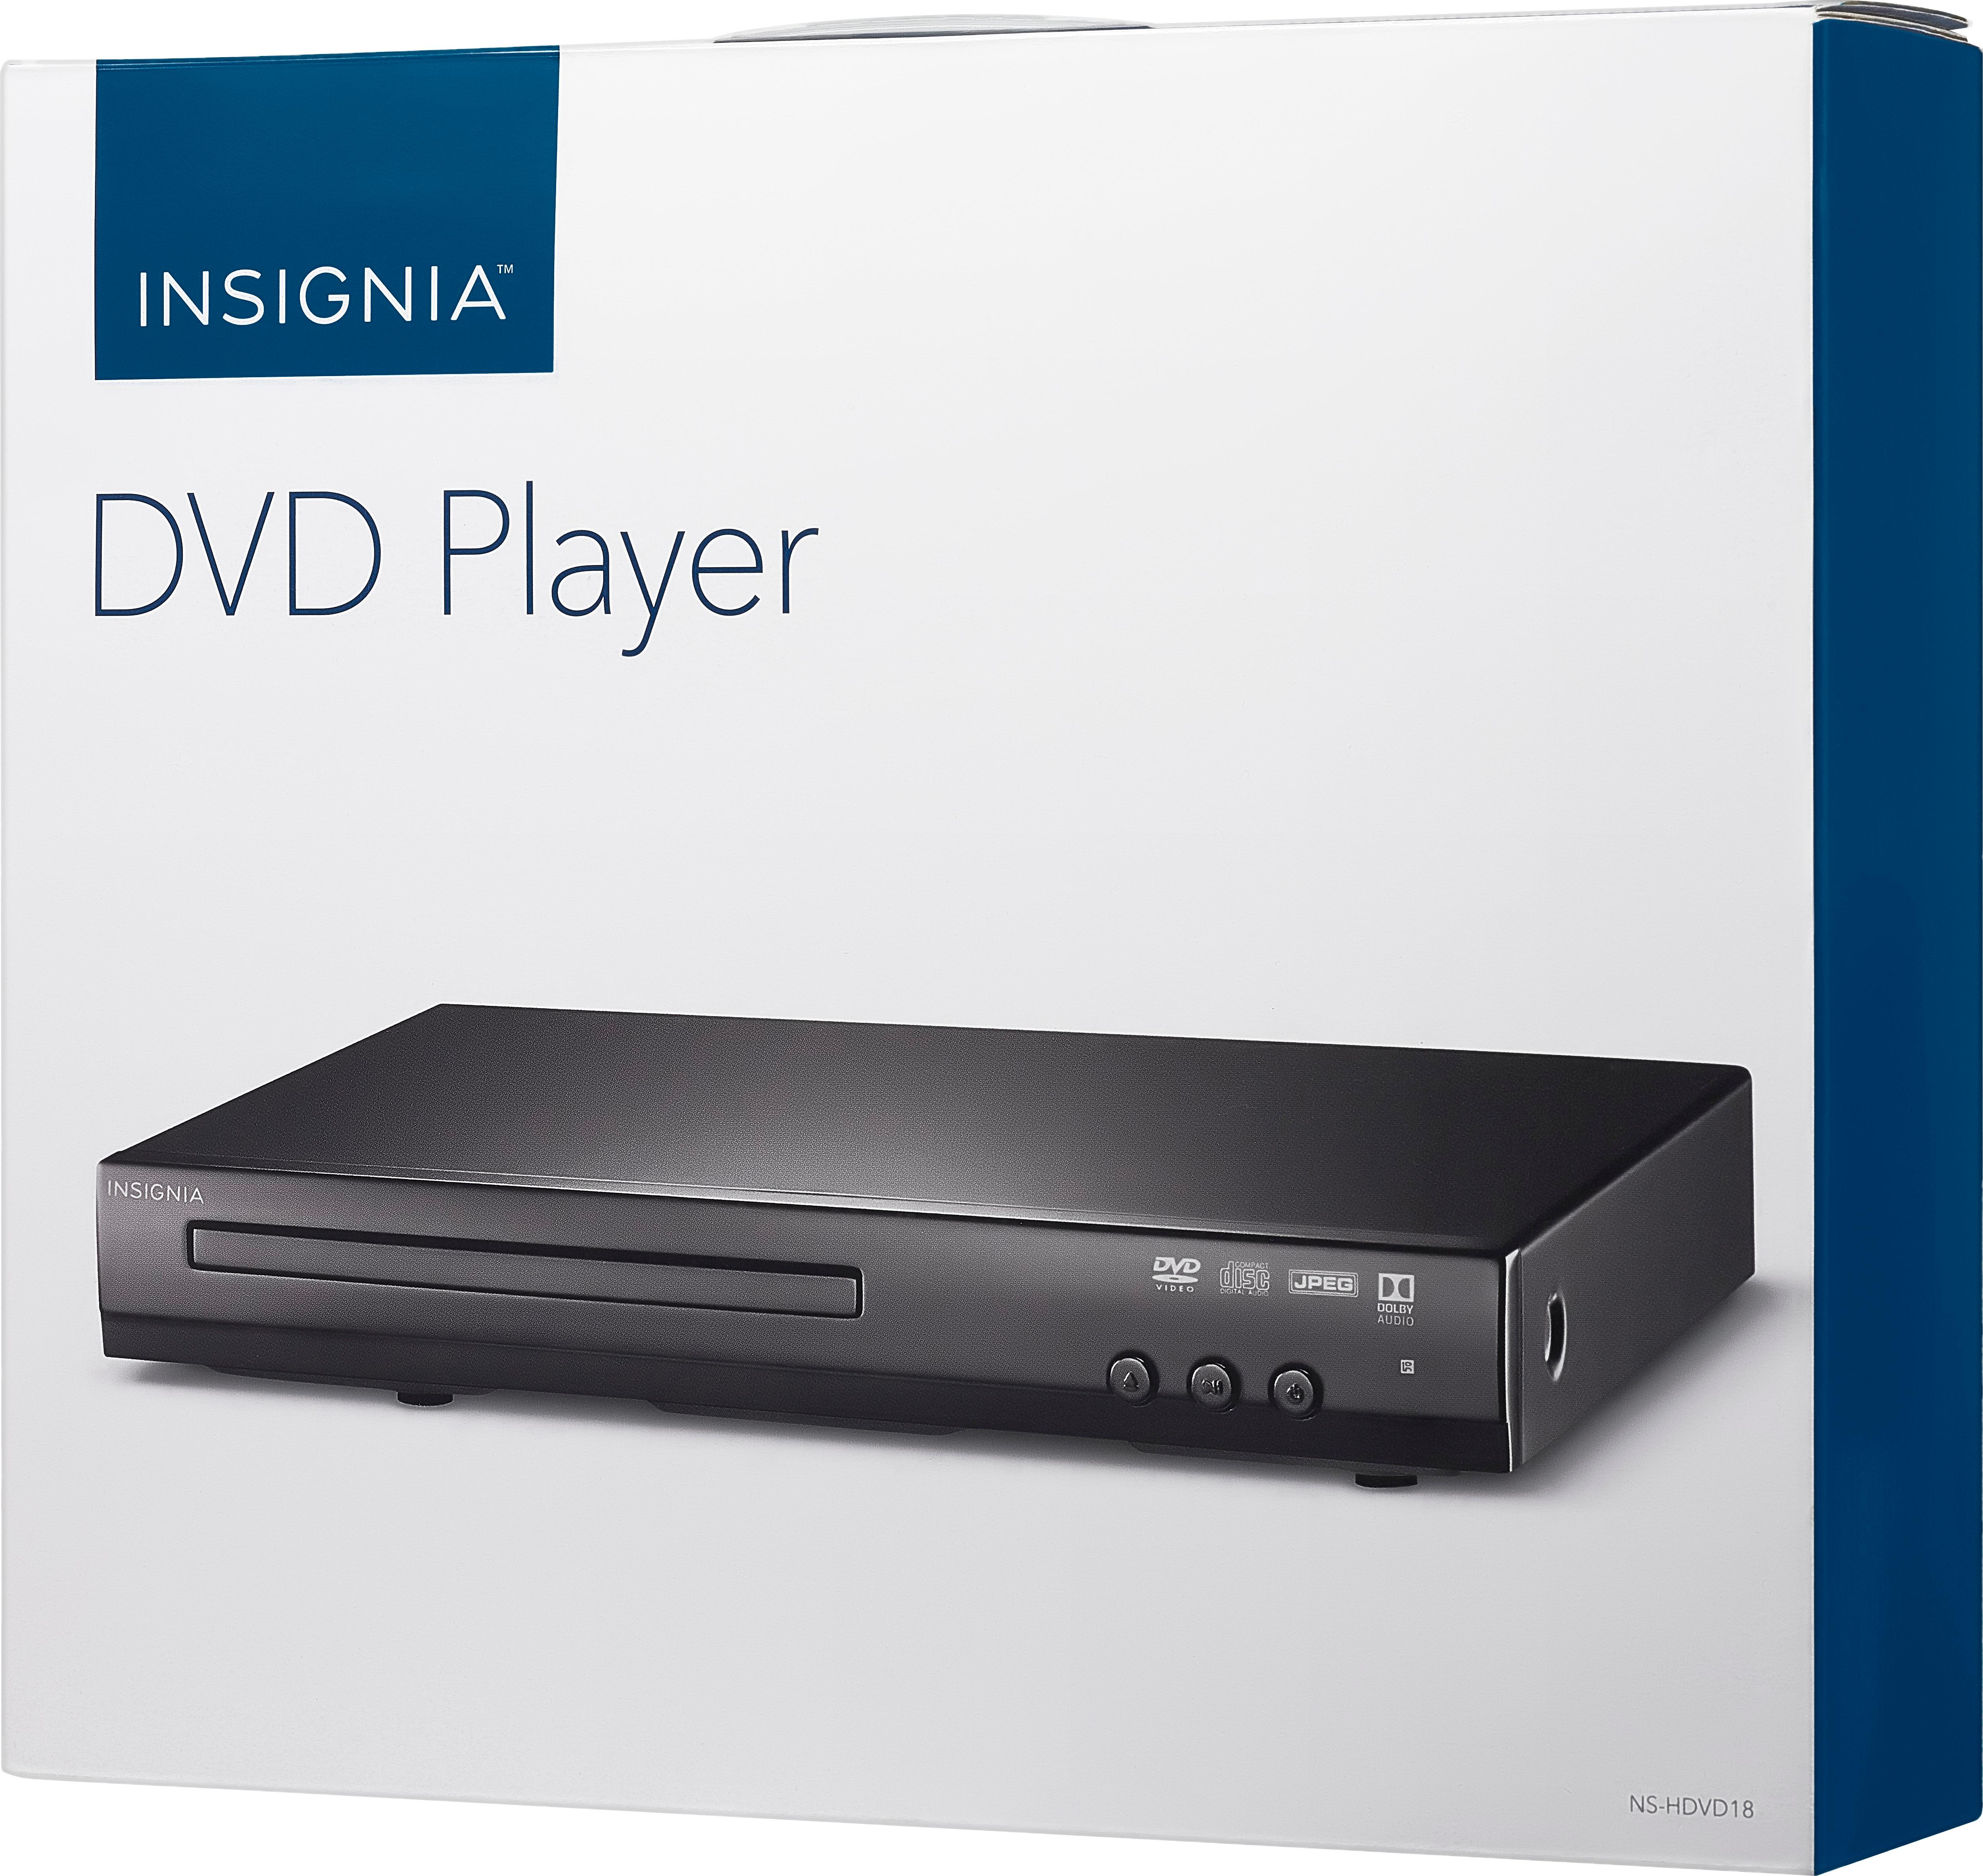 all dvd player free download